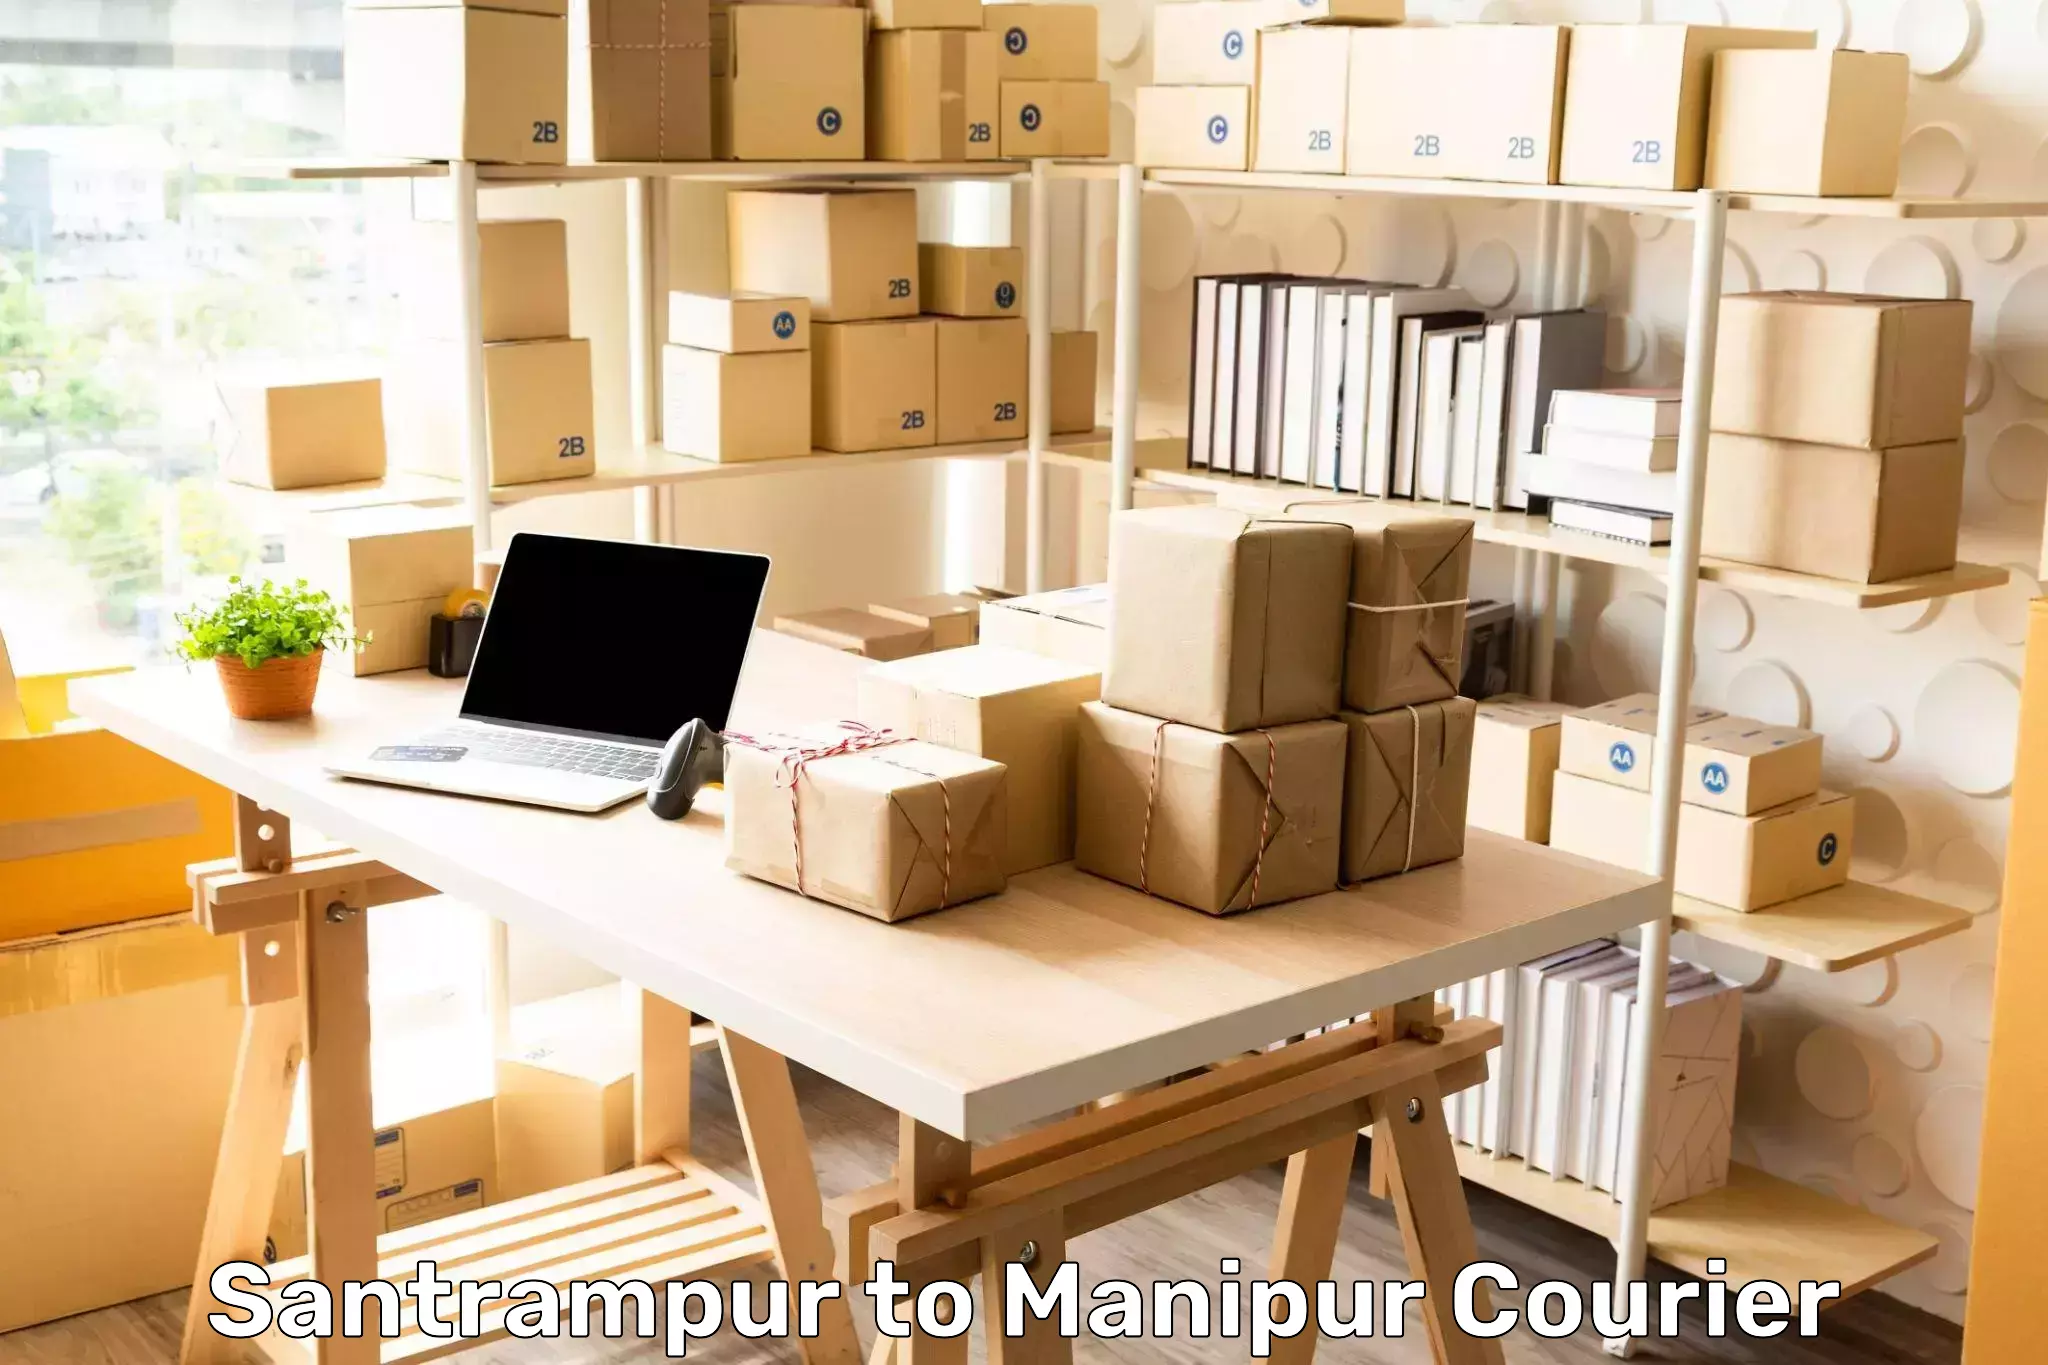 Full-service courier options Santrampur to Manipur